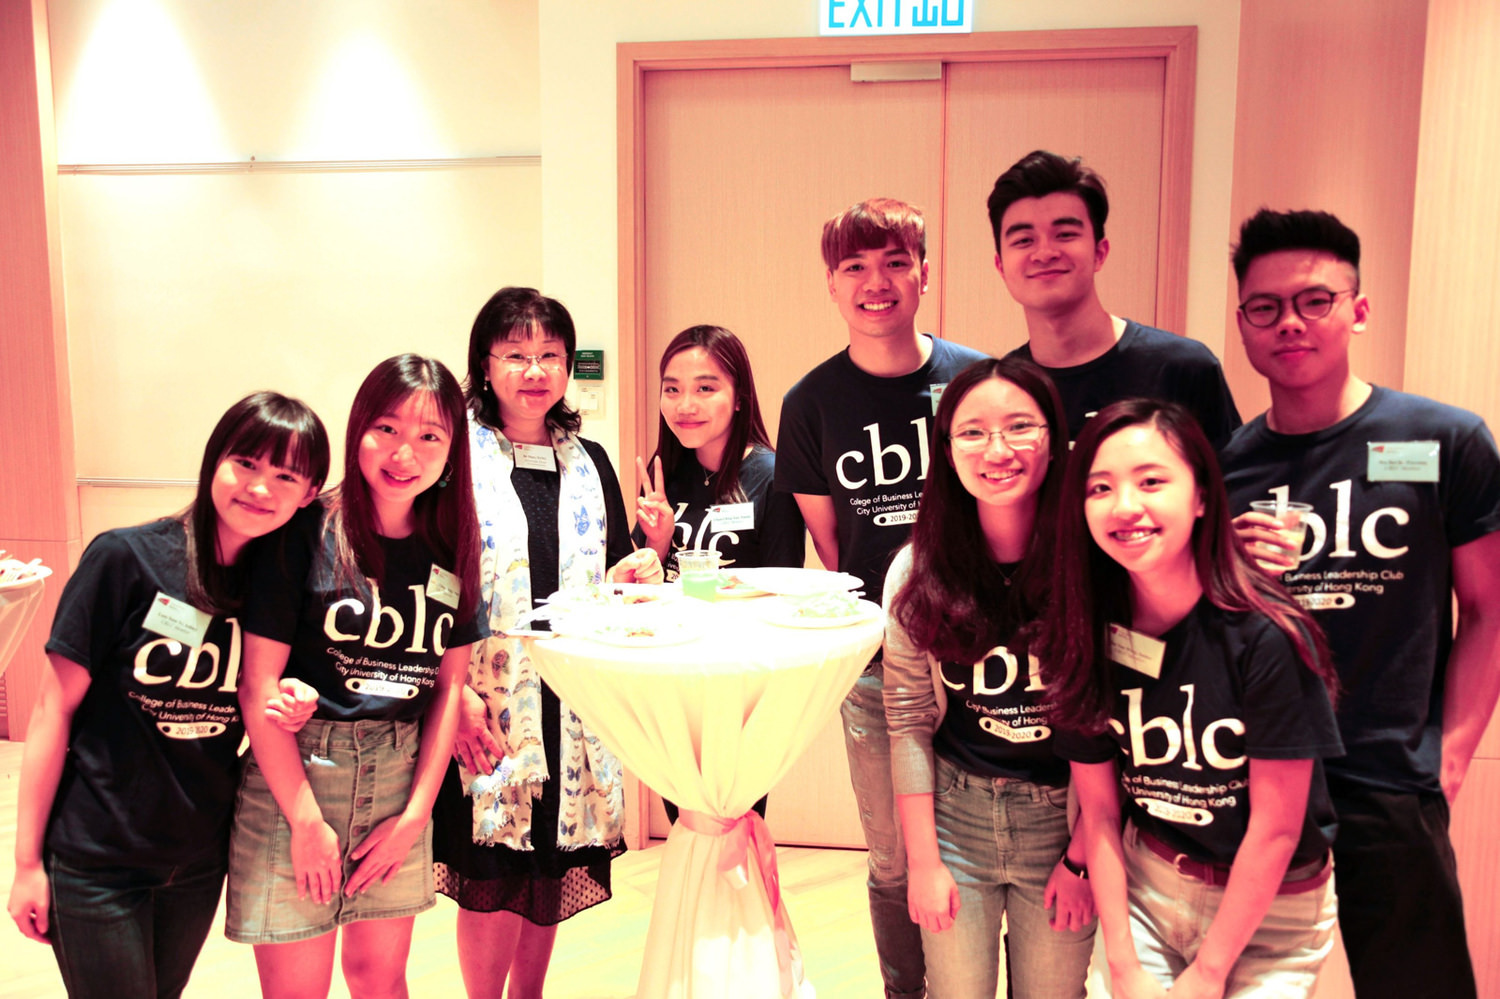 Dinner gathering for GBU and CFFT students 